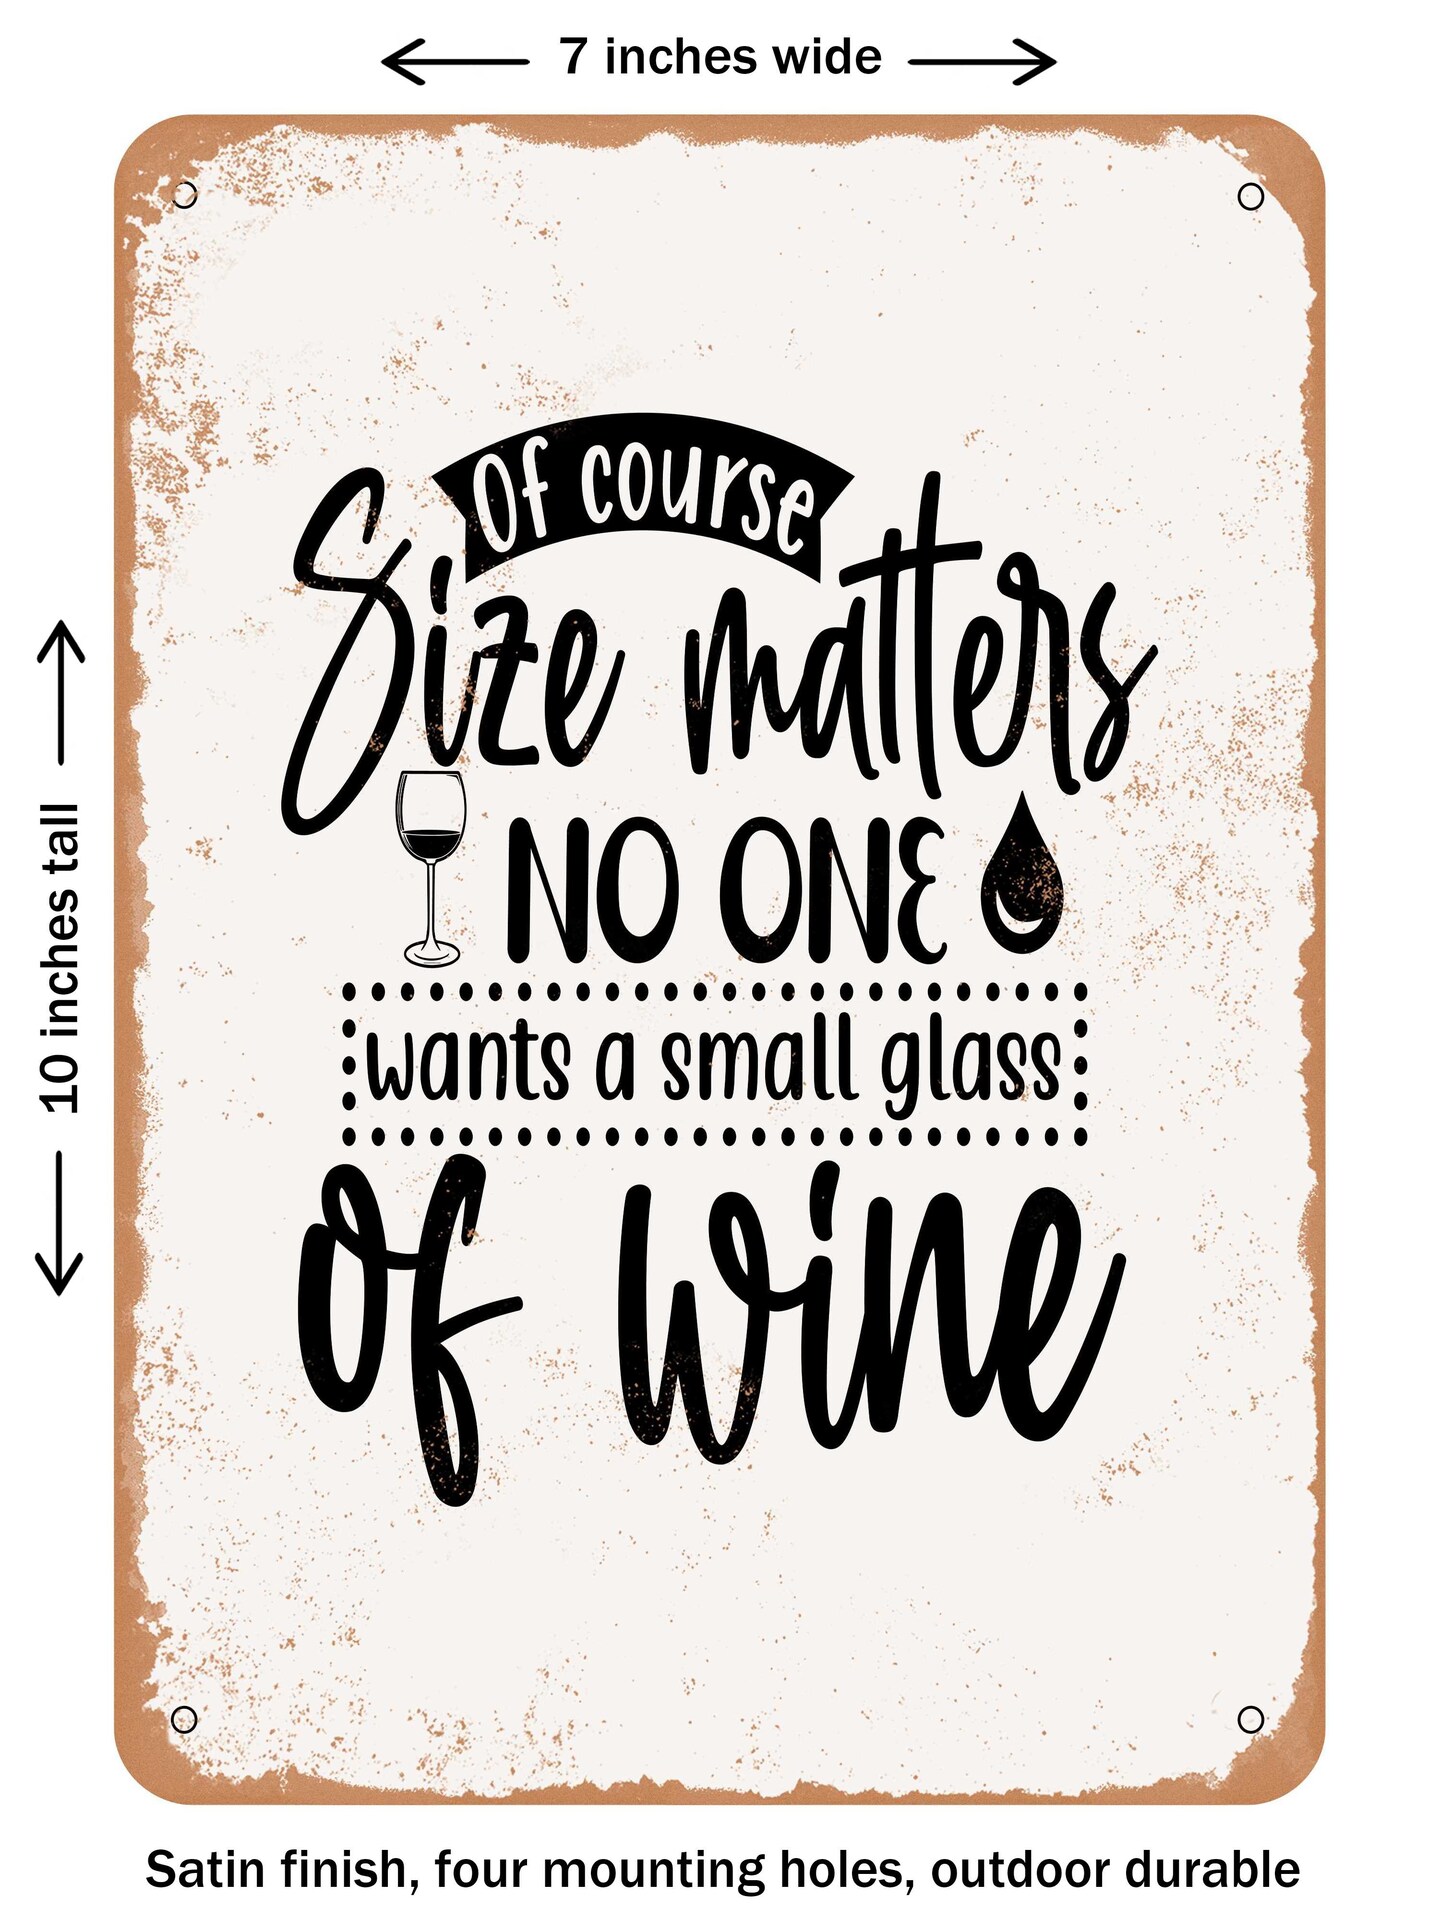 DECORATIVE METAL SIGN - of Course Size Matters No One Wants a Small Glass of Wine - 2 - Vintage Rusty Look